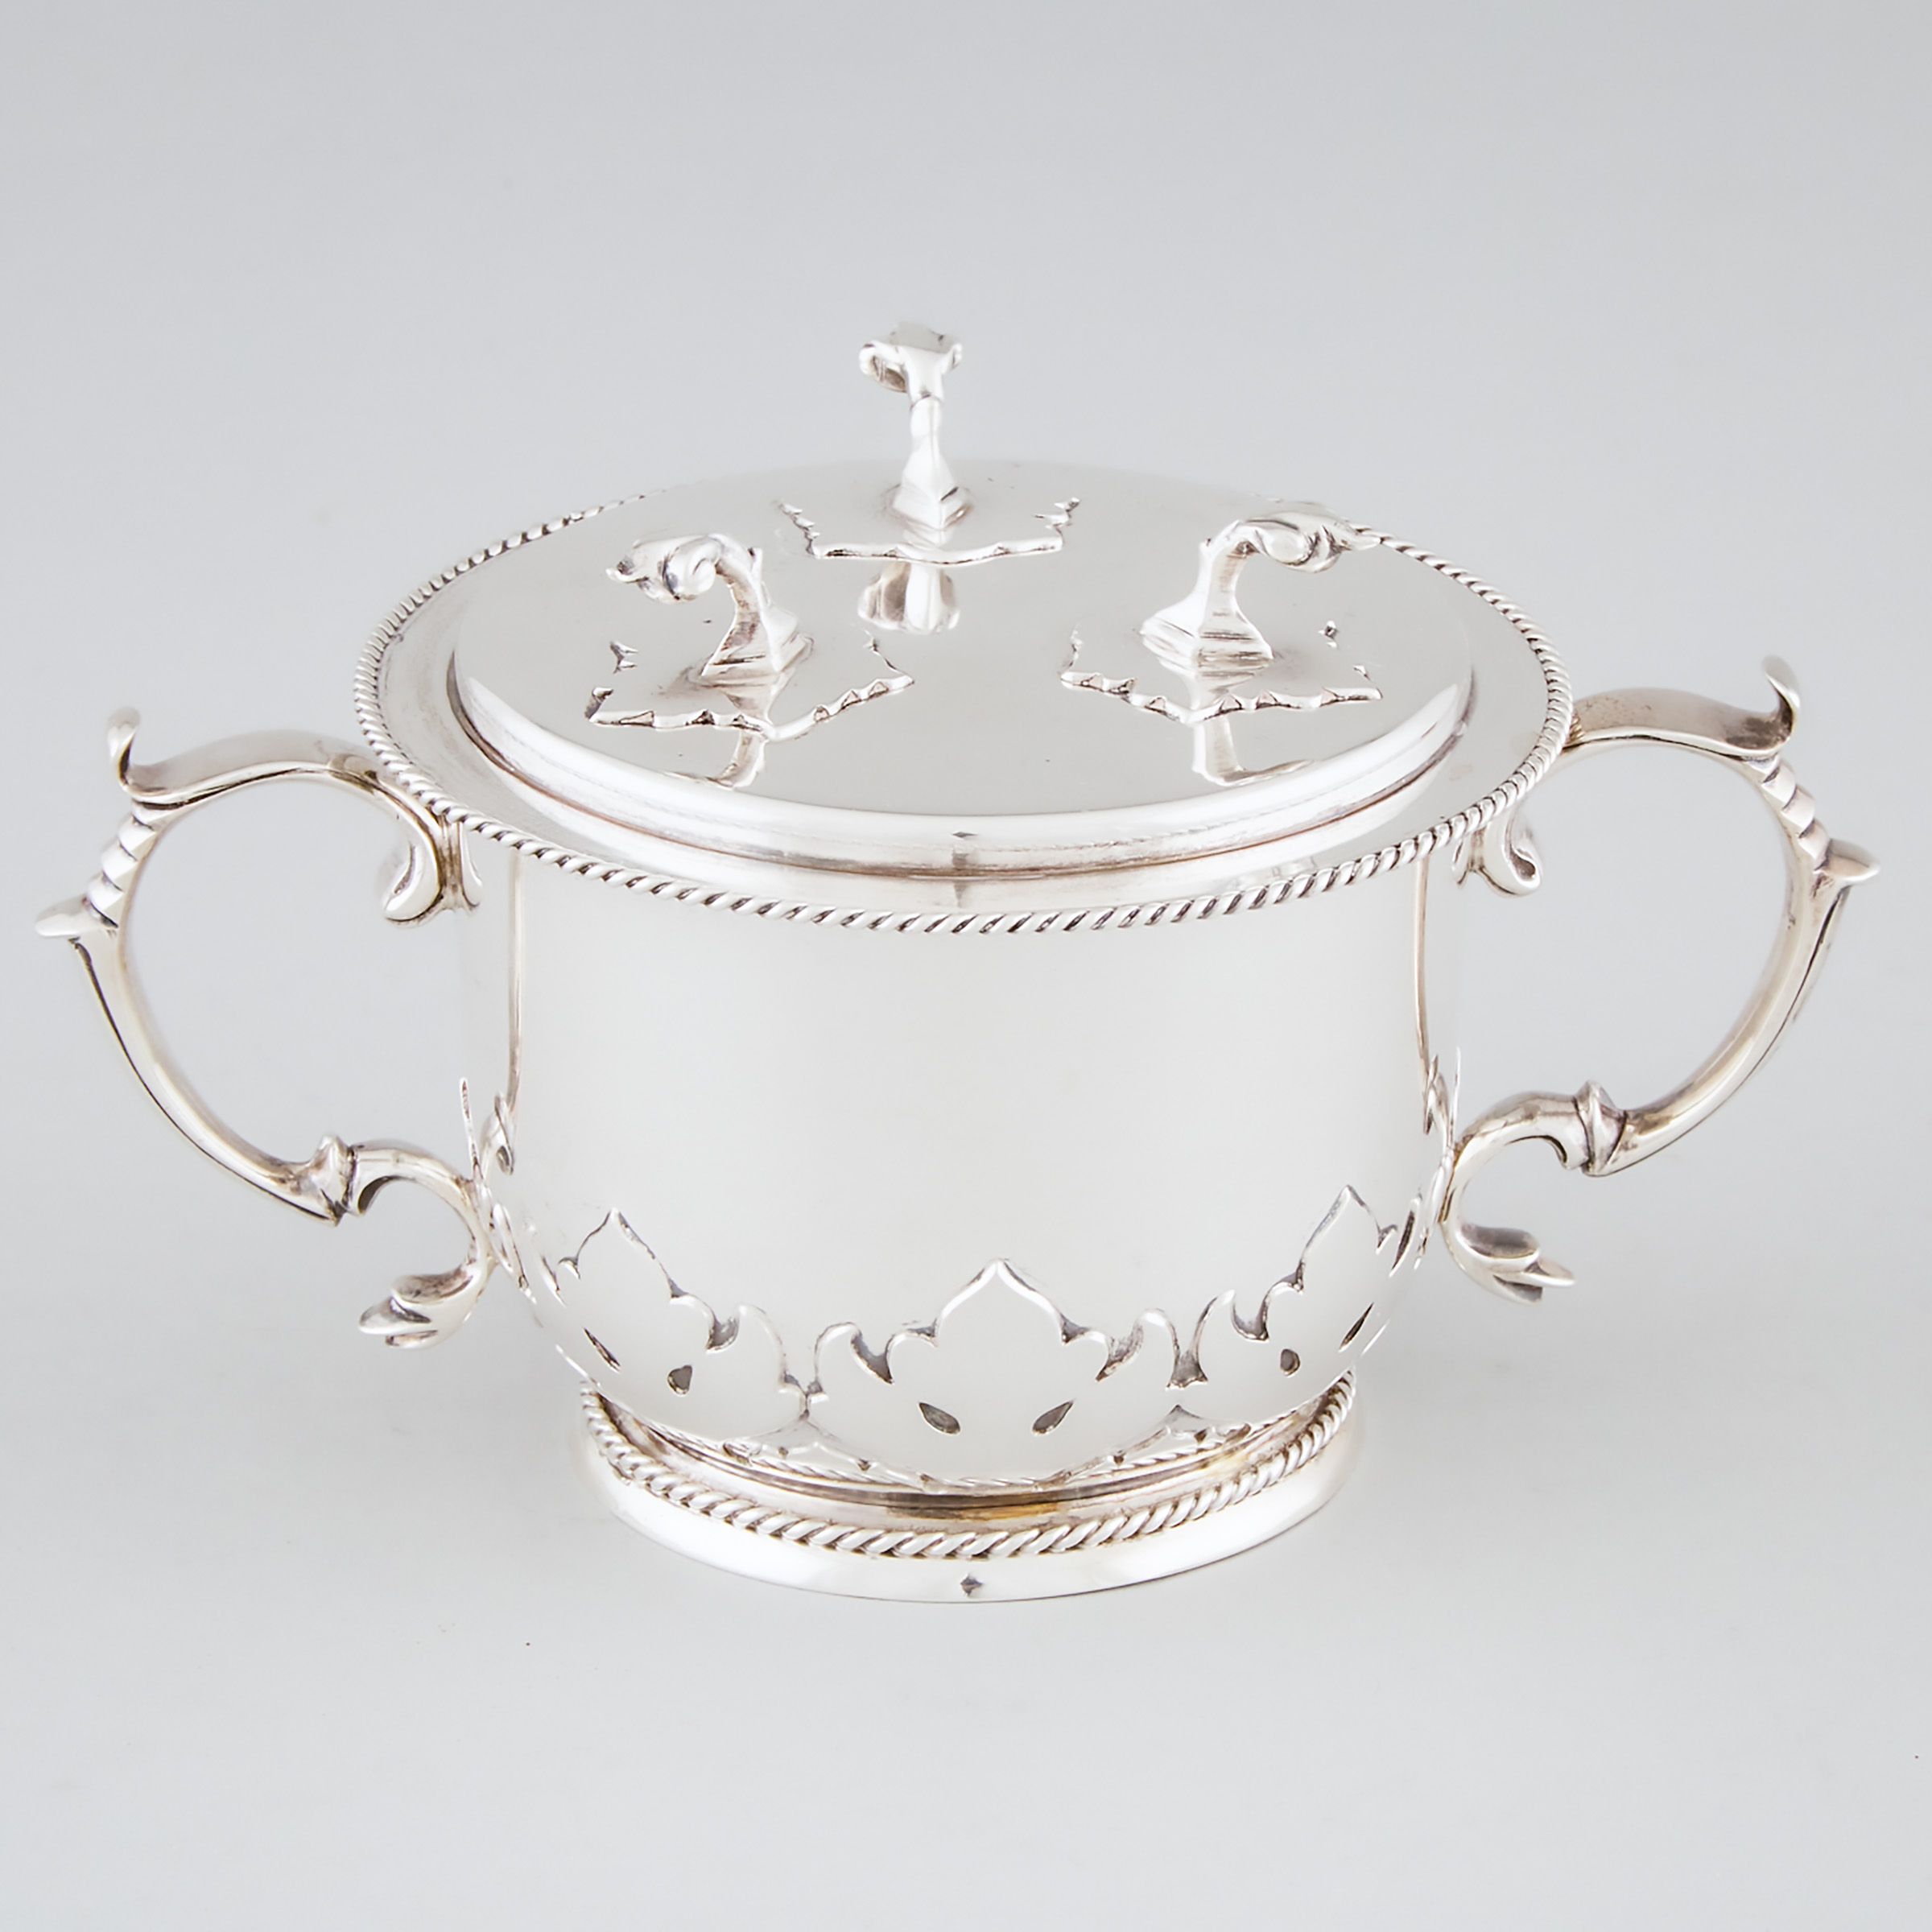 Edwardian Silver Two-Handled Cup and Cover, Charles Stuart Harris & Sons, London, 1908